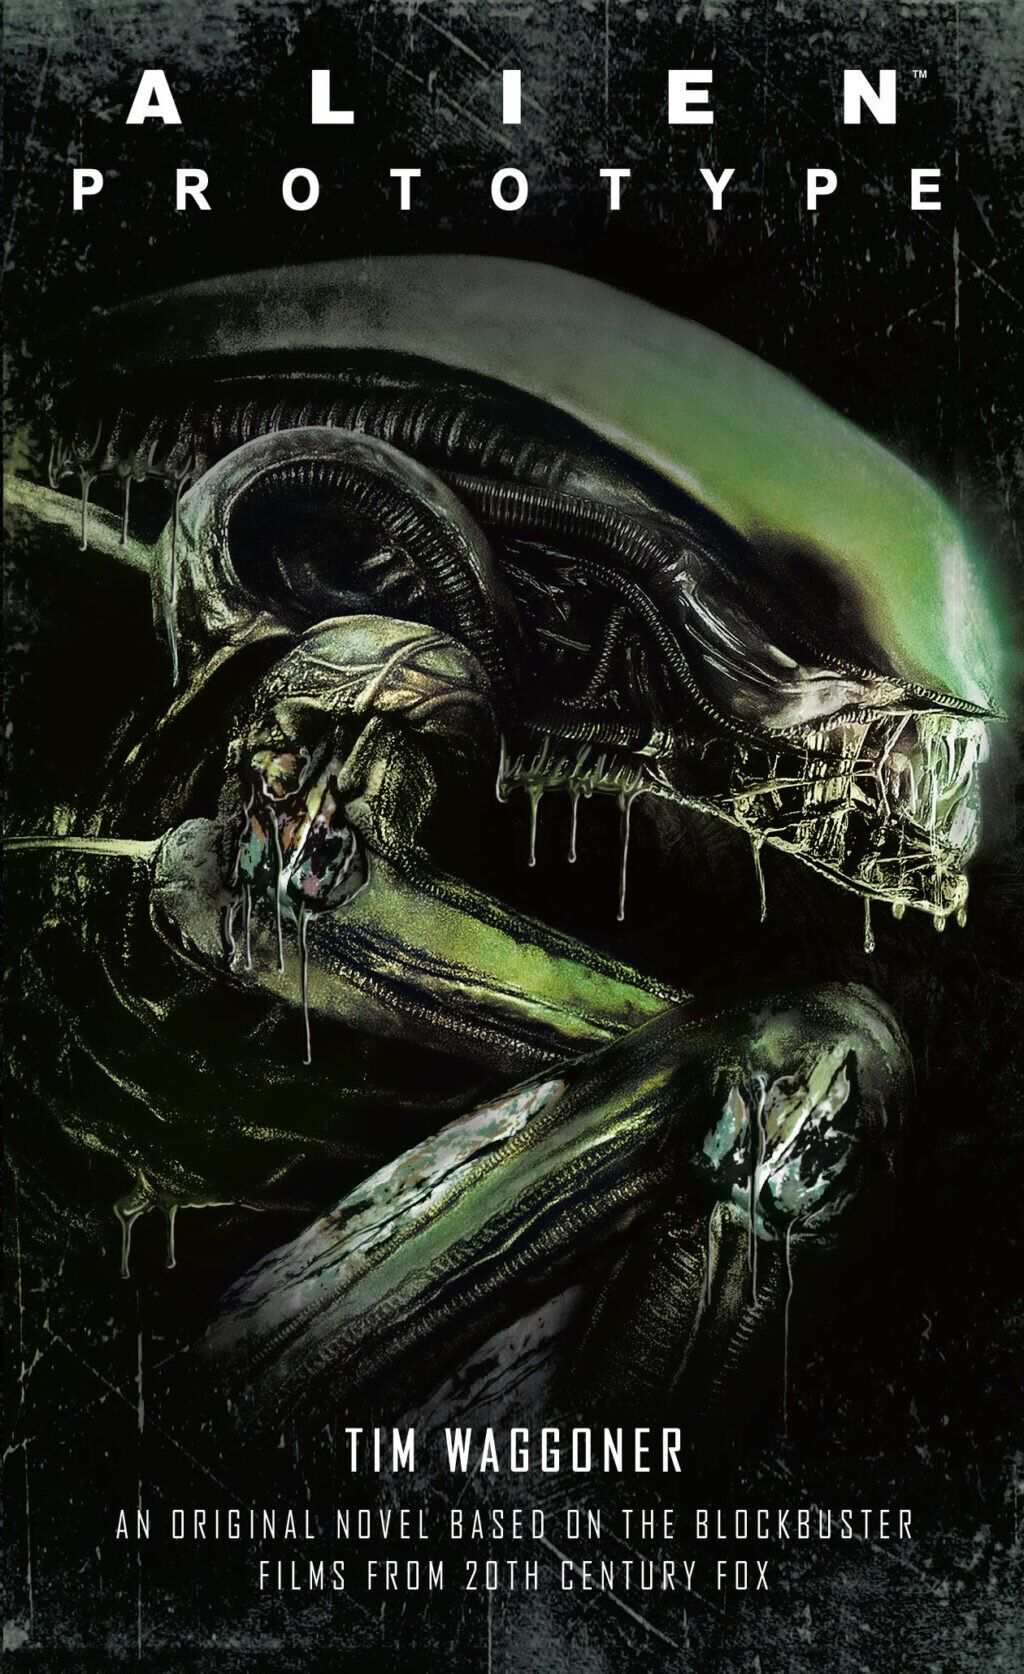 The cover of Tim Waggoner’s book Alien: Prototype, with a side-on close-up of a Xenomorph